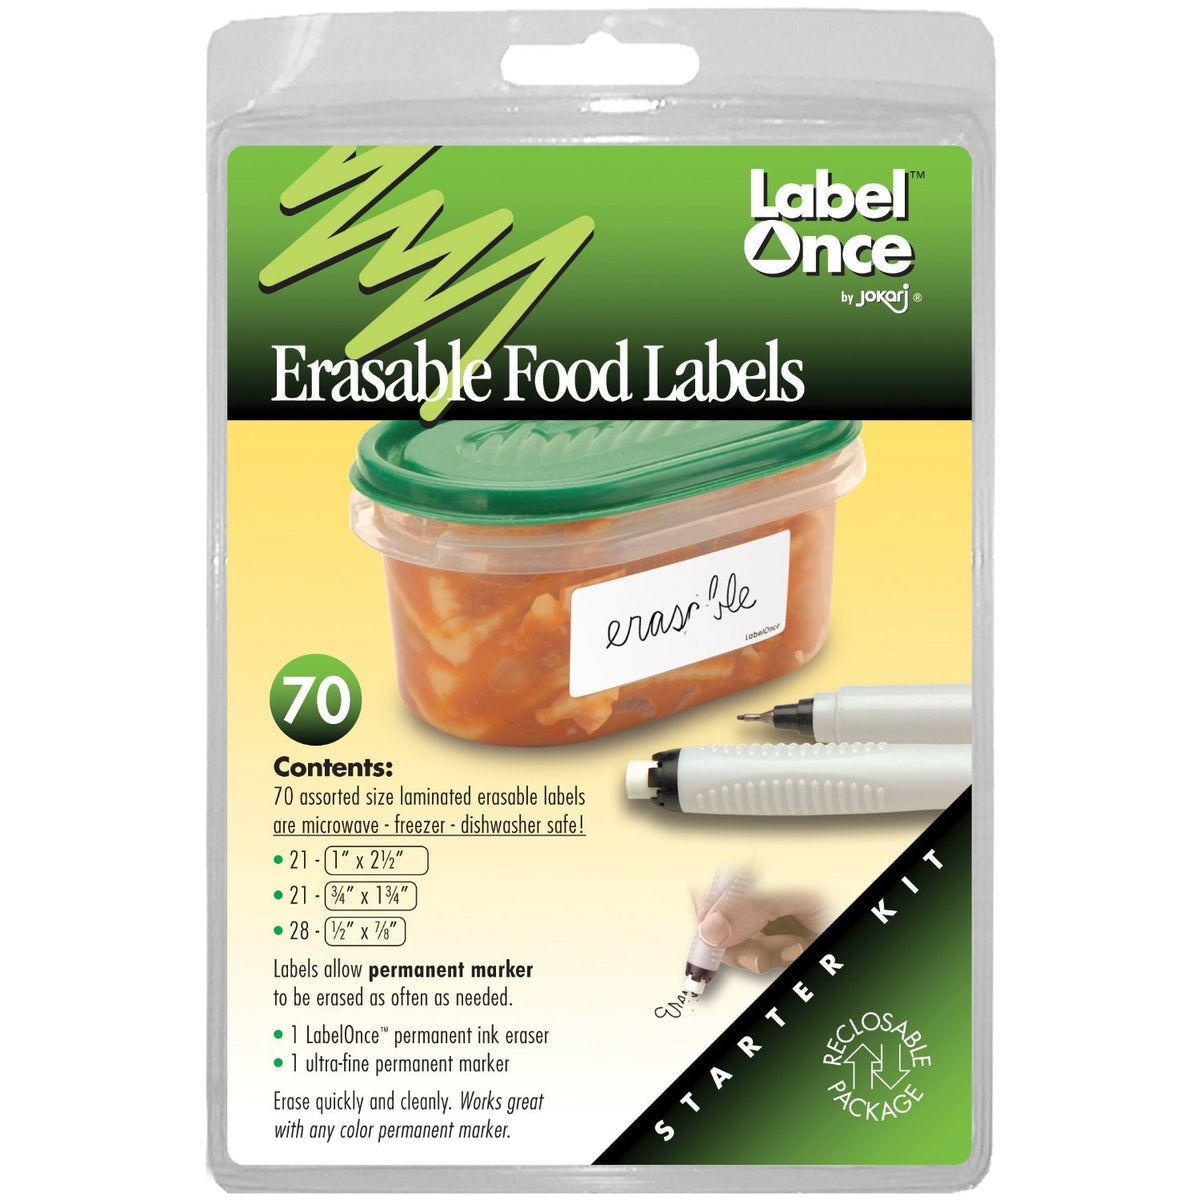 Buy label@once 1.0 - Online store for stationary & office equipment, label maker in USA, on sale, low price, discount deals, coupon code